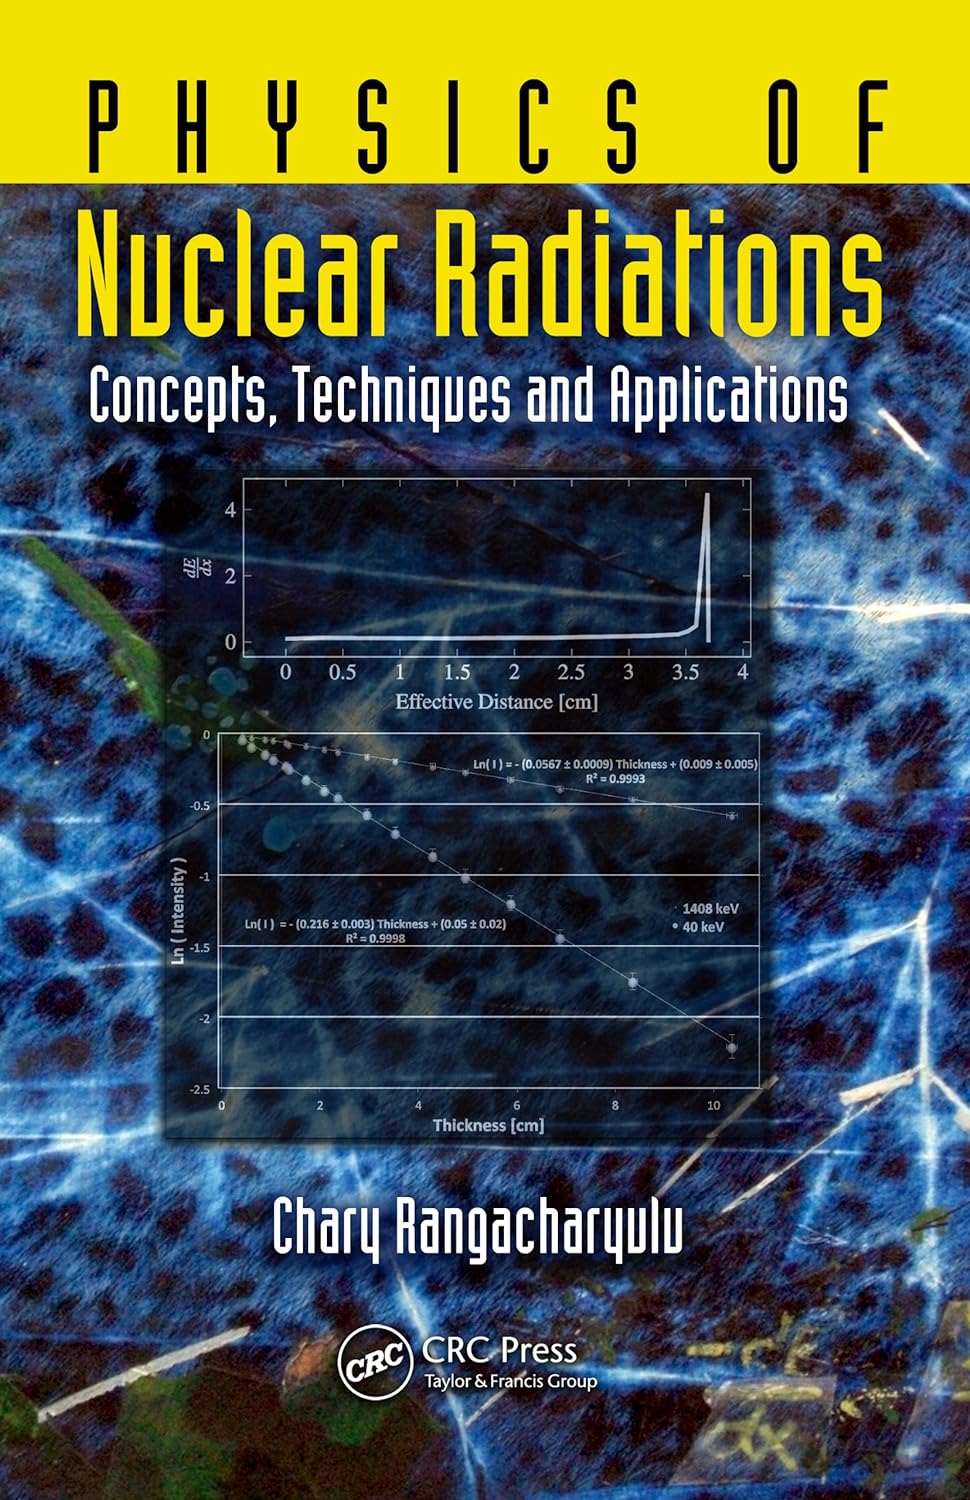 Physics of nuclear radiations concepts, techniques and applications